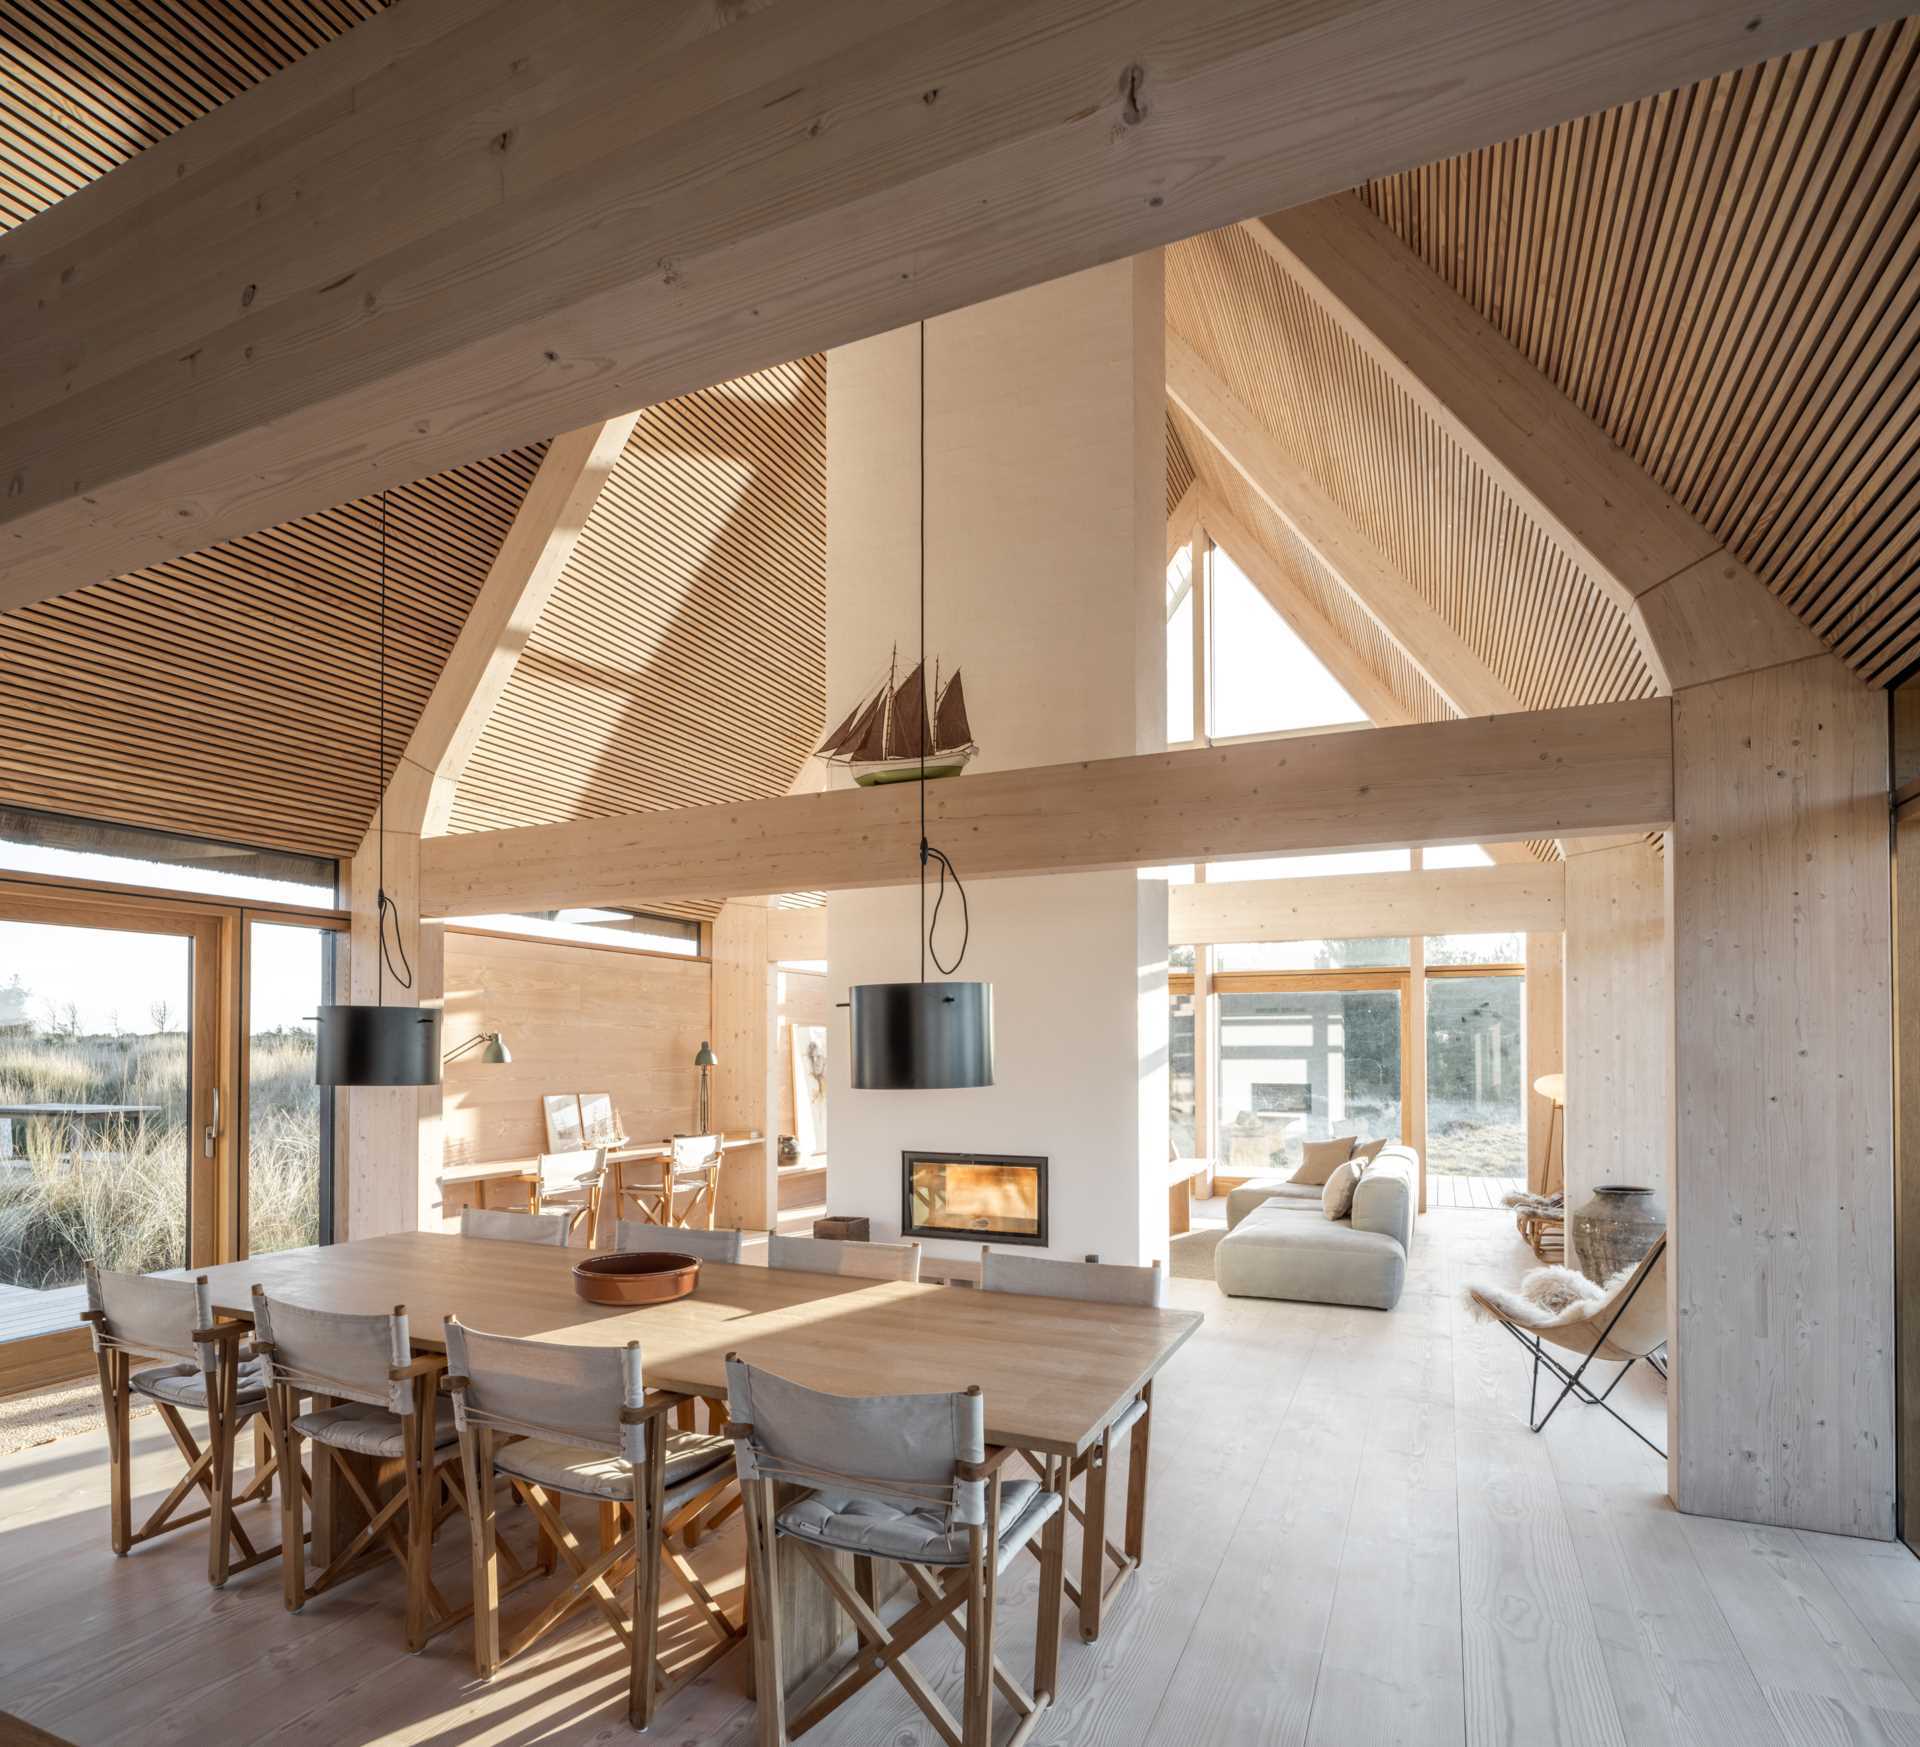 A light and natural color palette can be seen throughout this modern house, with a fireplace able to be enjoyed from both sides.